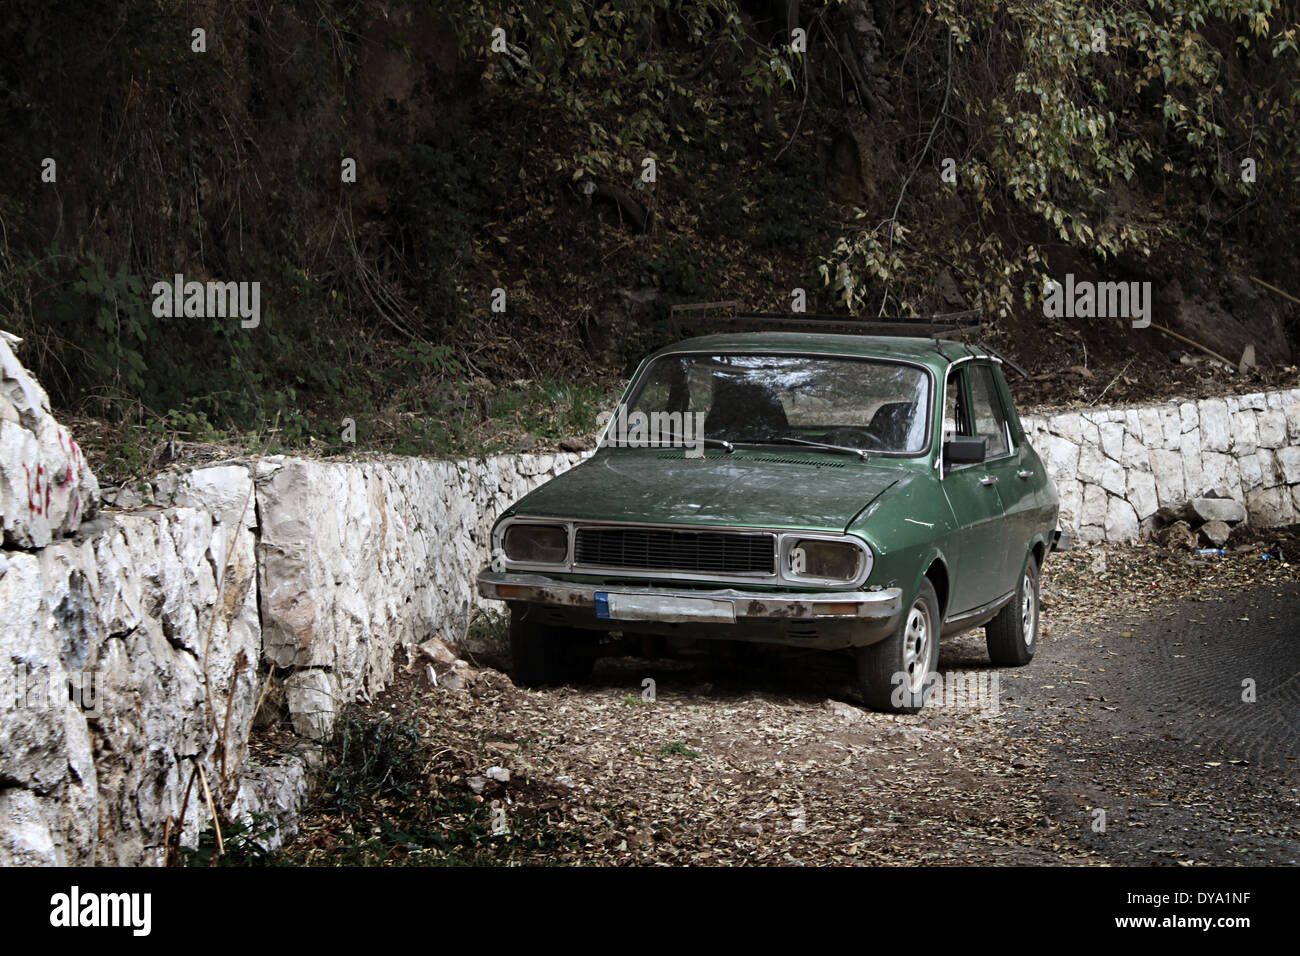 An old green car parked on the side of the road near trees. Stock Photo